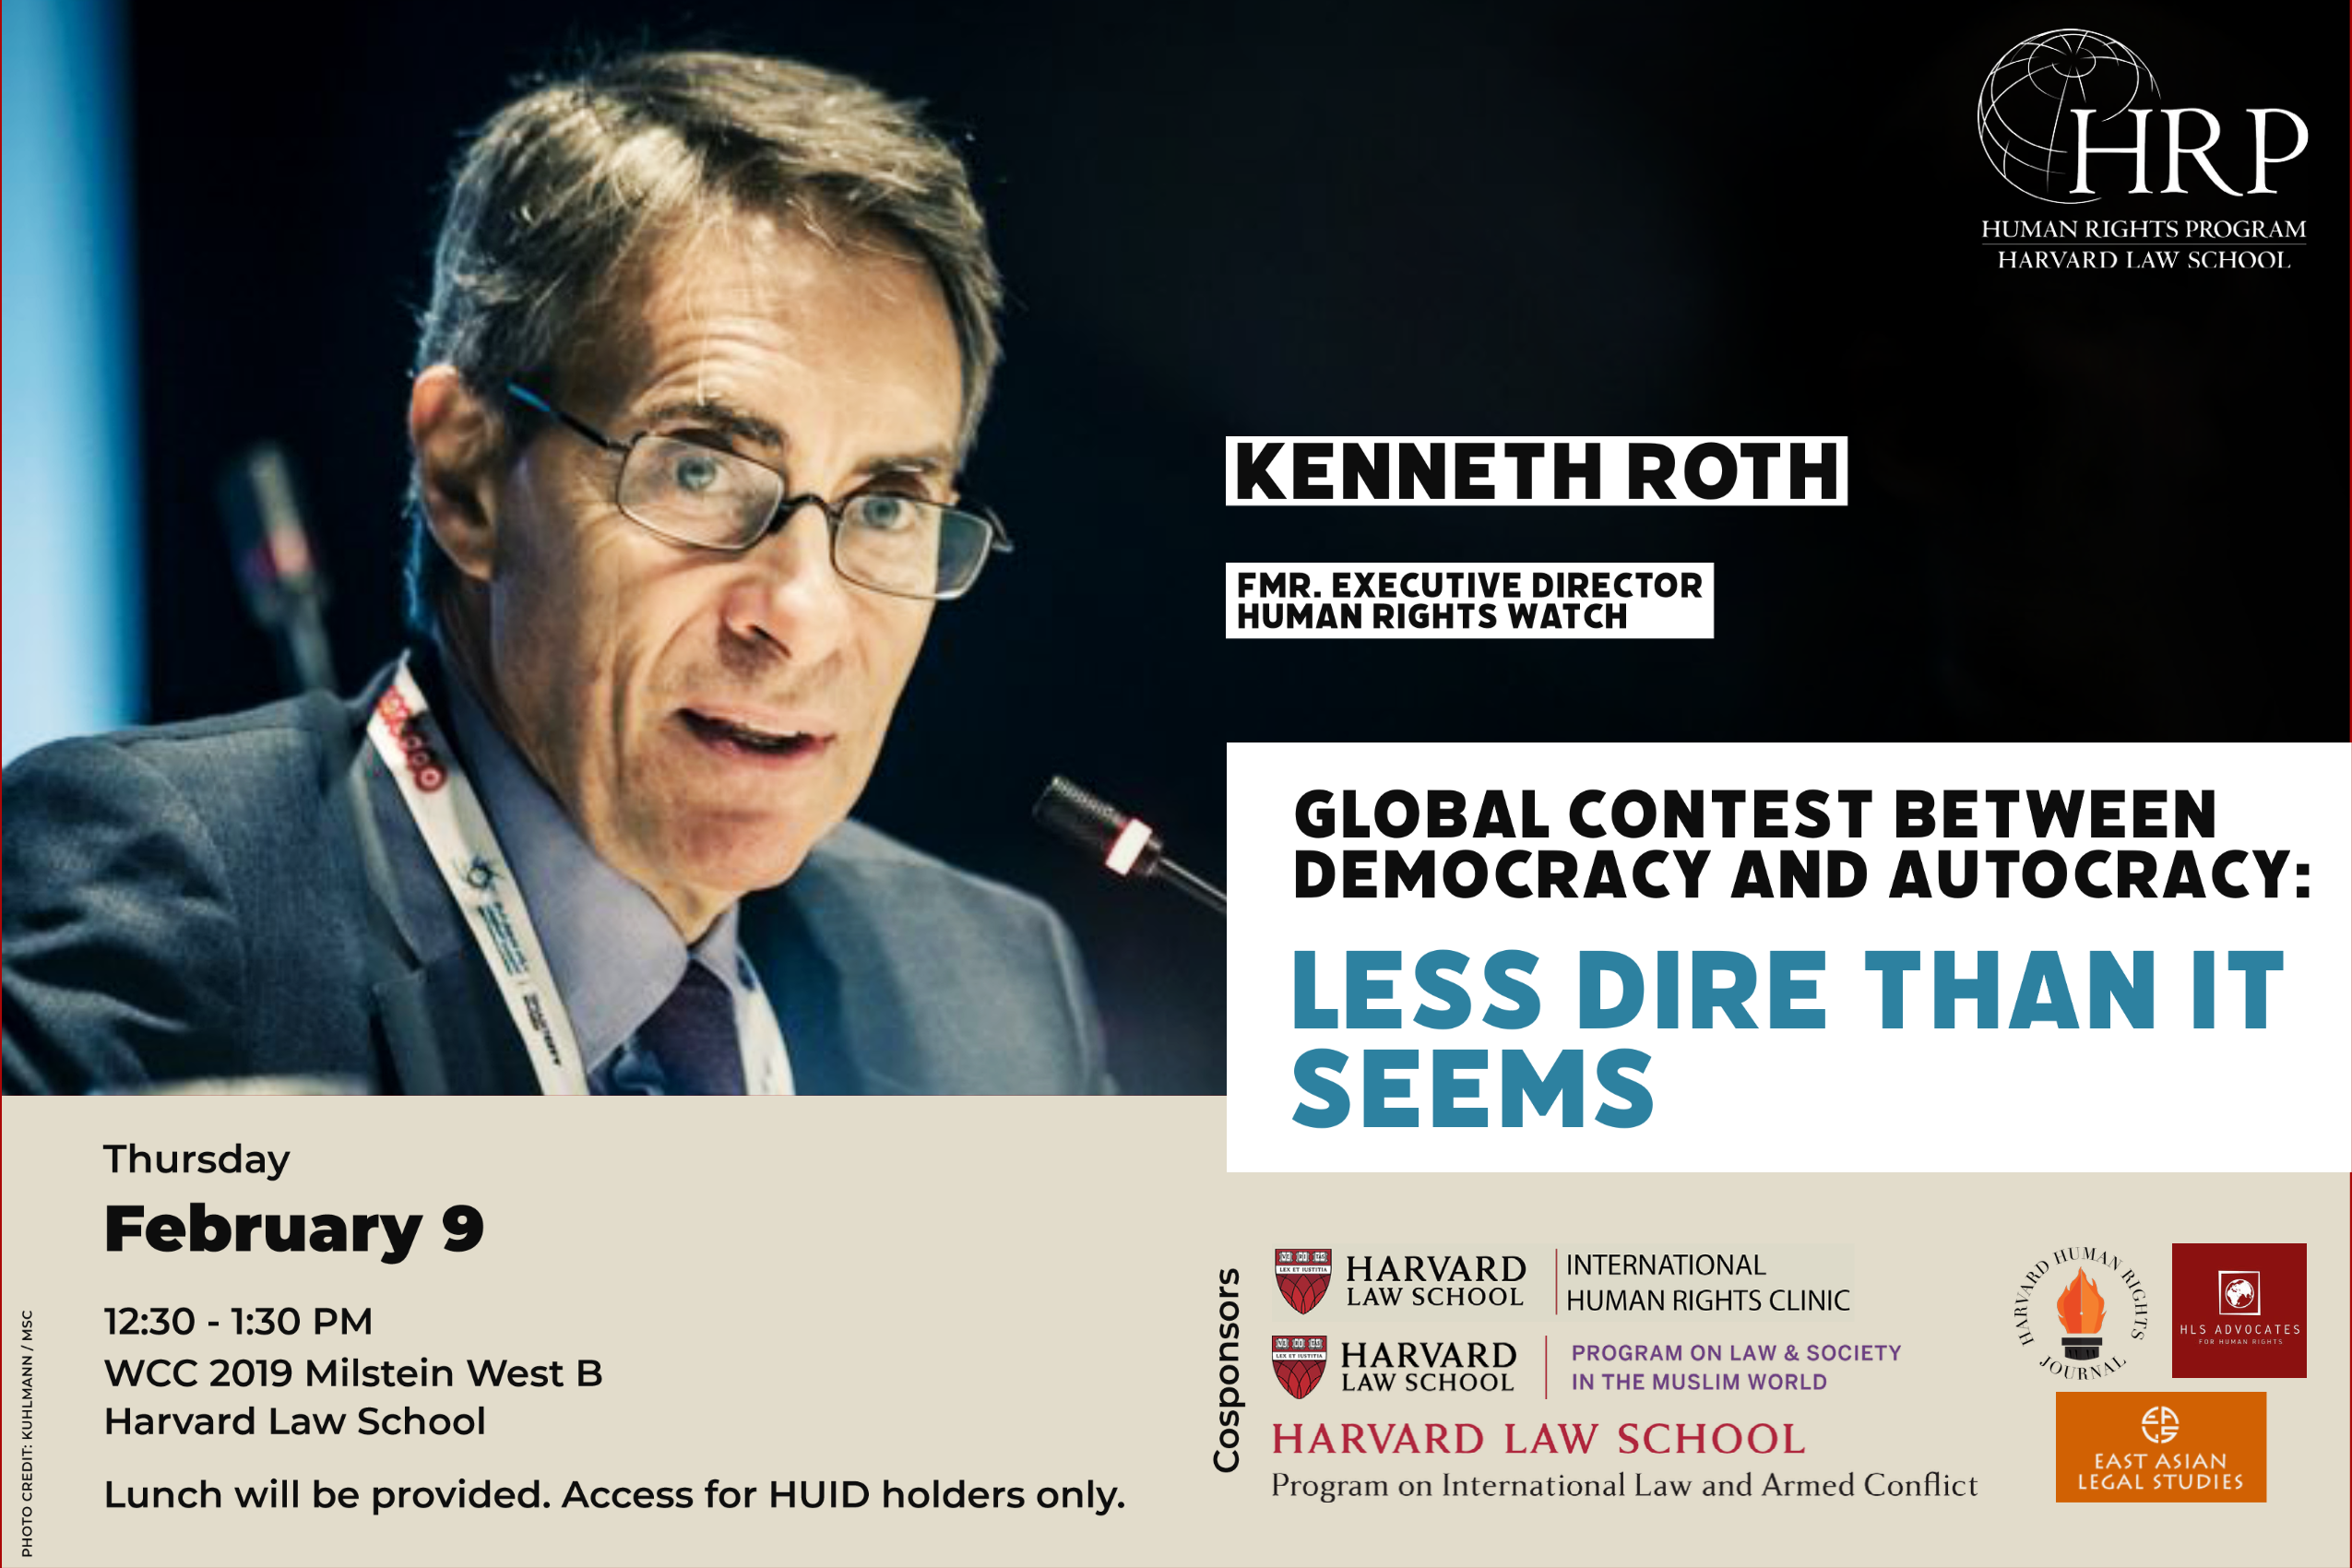 Banner for the discussion “The Global Contest between Democracy and Autocracy: Less Dire Than It Seems” with former Human Rights Watch executive director Kenneth Roth on February 9, at 12:30pm in WCC 2019 Milstein West B at Harvard Law School. Photo of Kenneth Roth speaking into microphone while wearing suit.